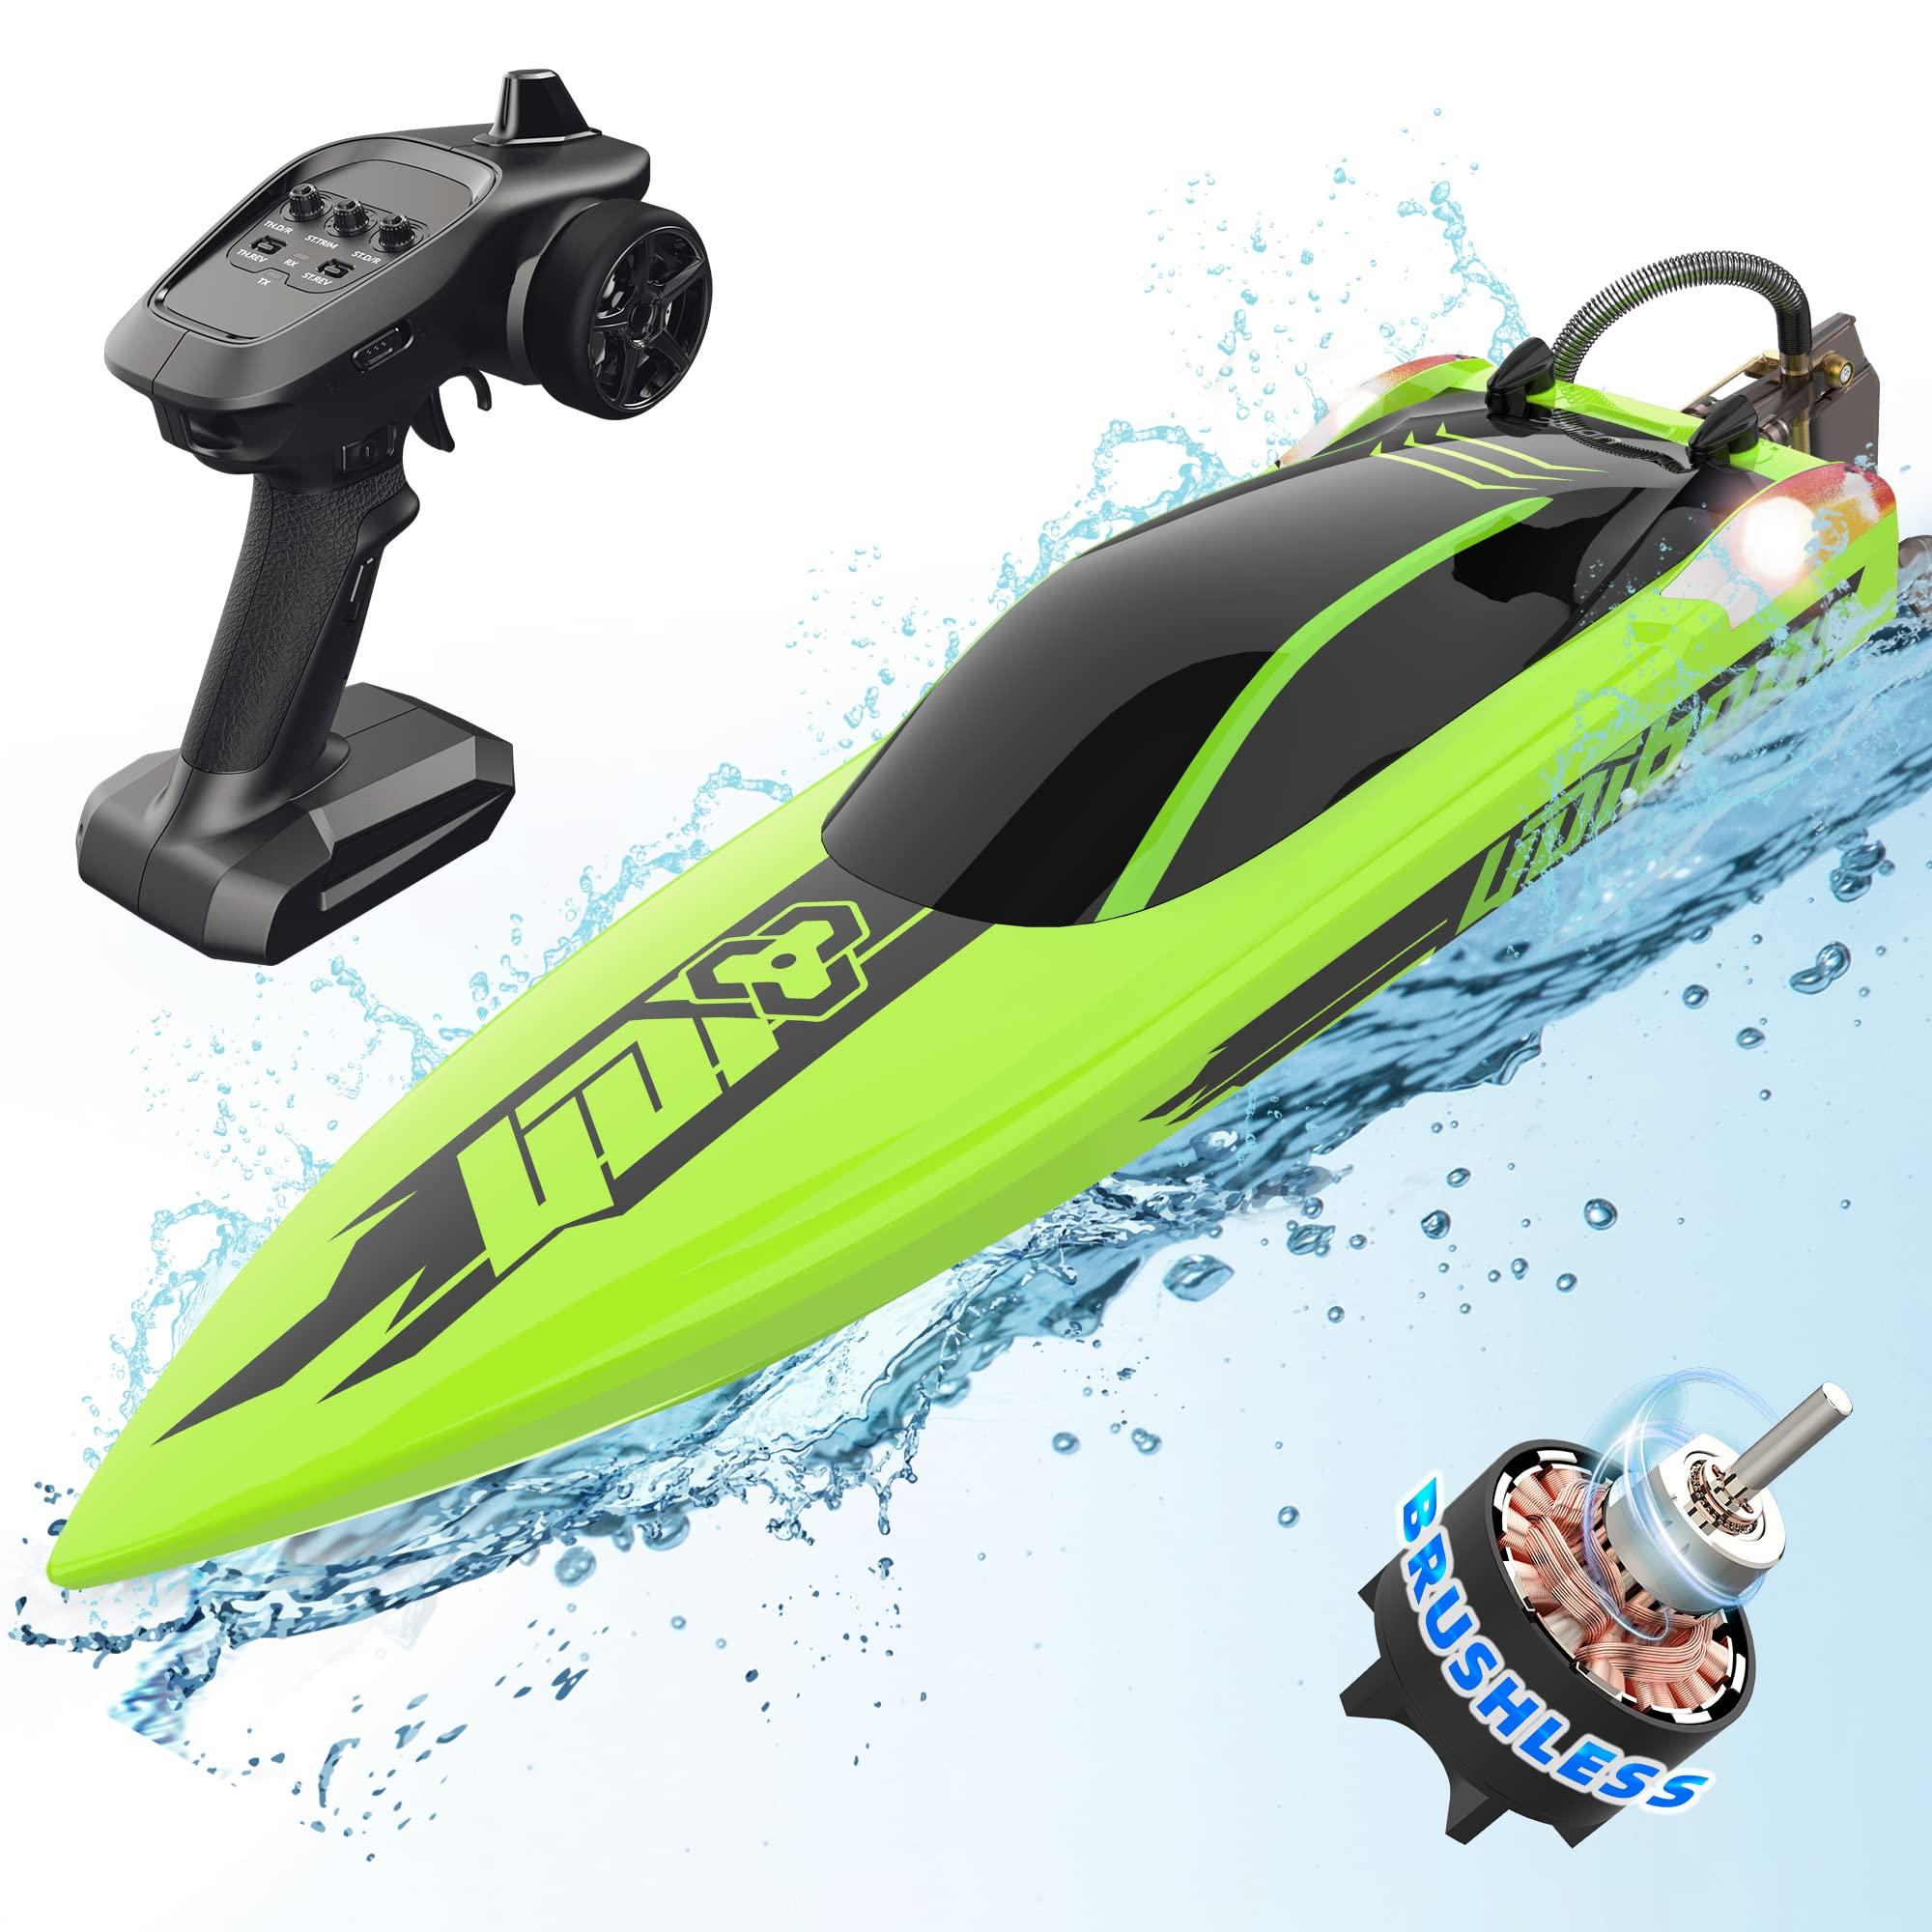 Big Rc Speed Boats: Keeping Your Big RC Speed Boat in Top Condition